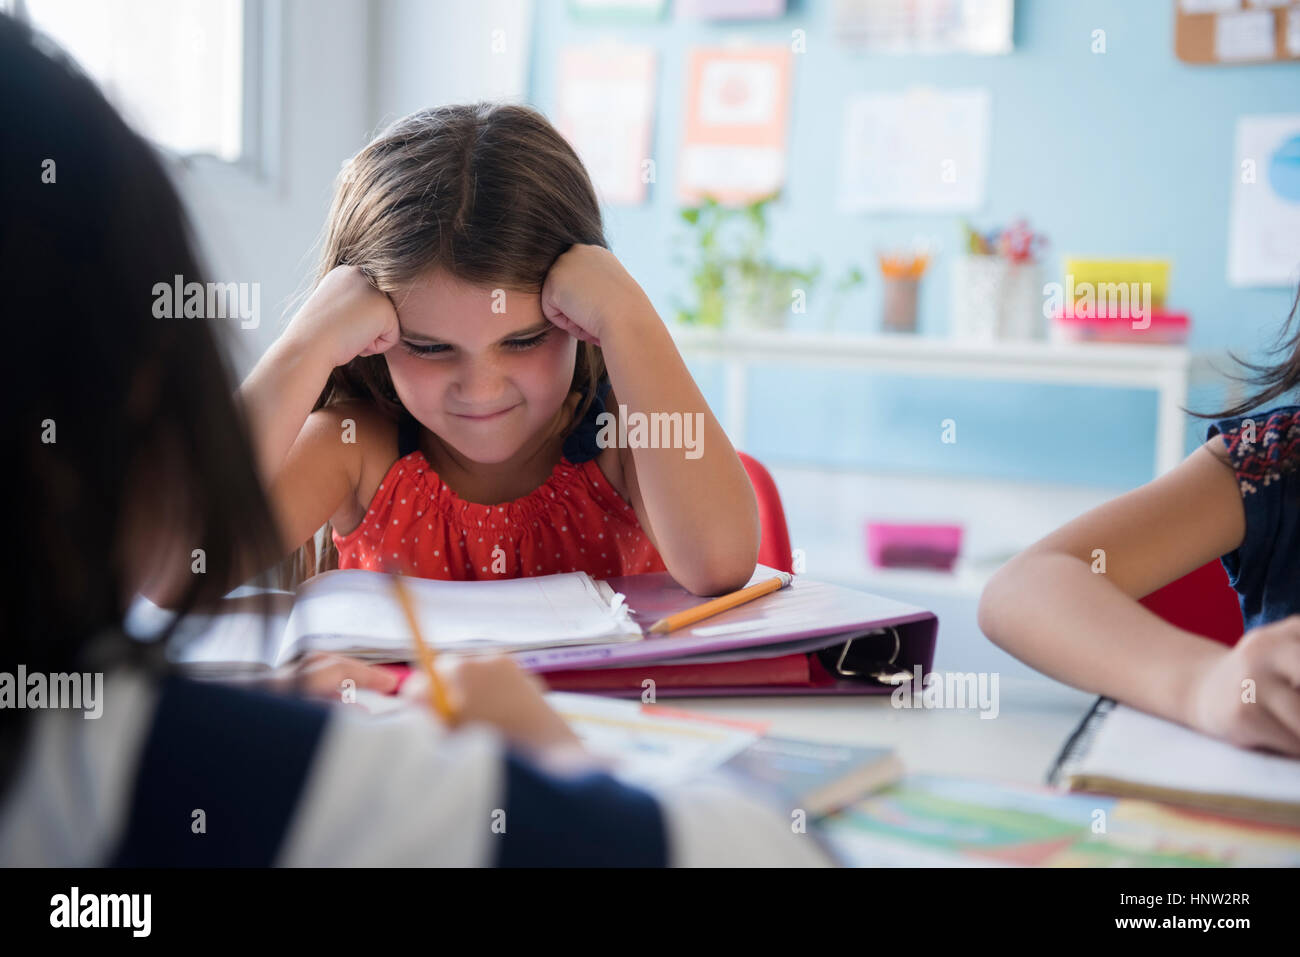 Frustrated girl staring at notebook in school Stock Photo